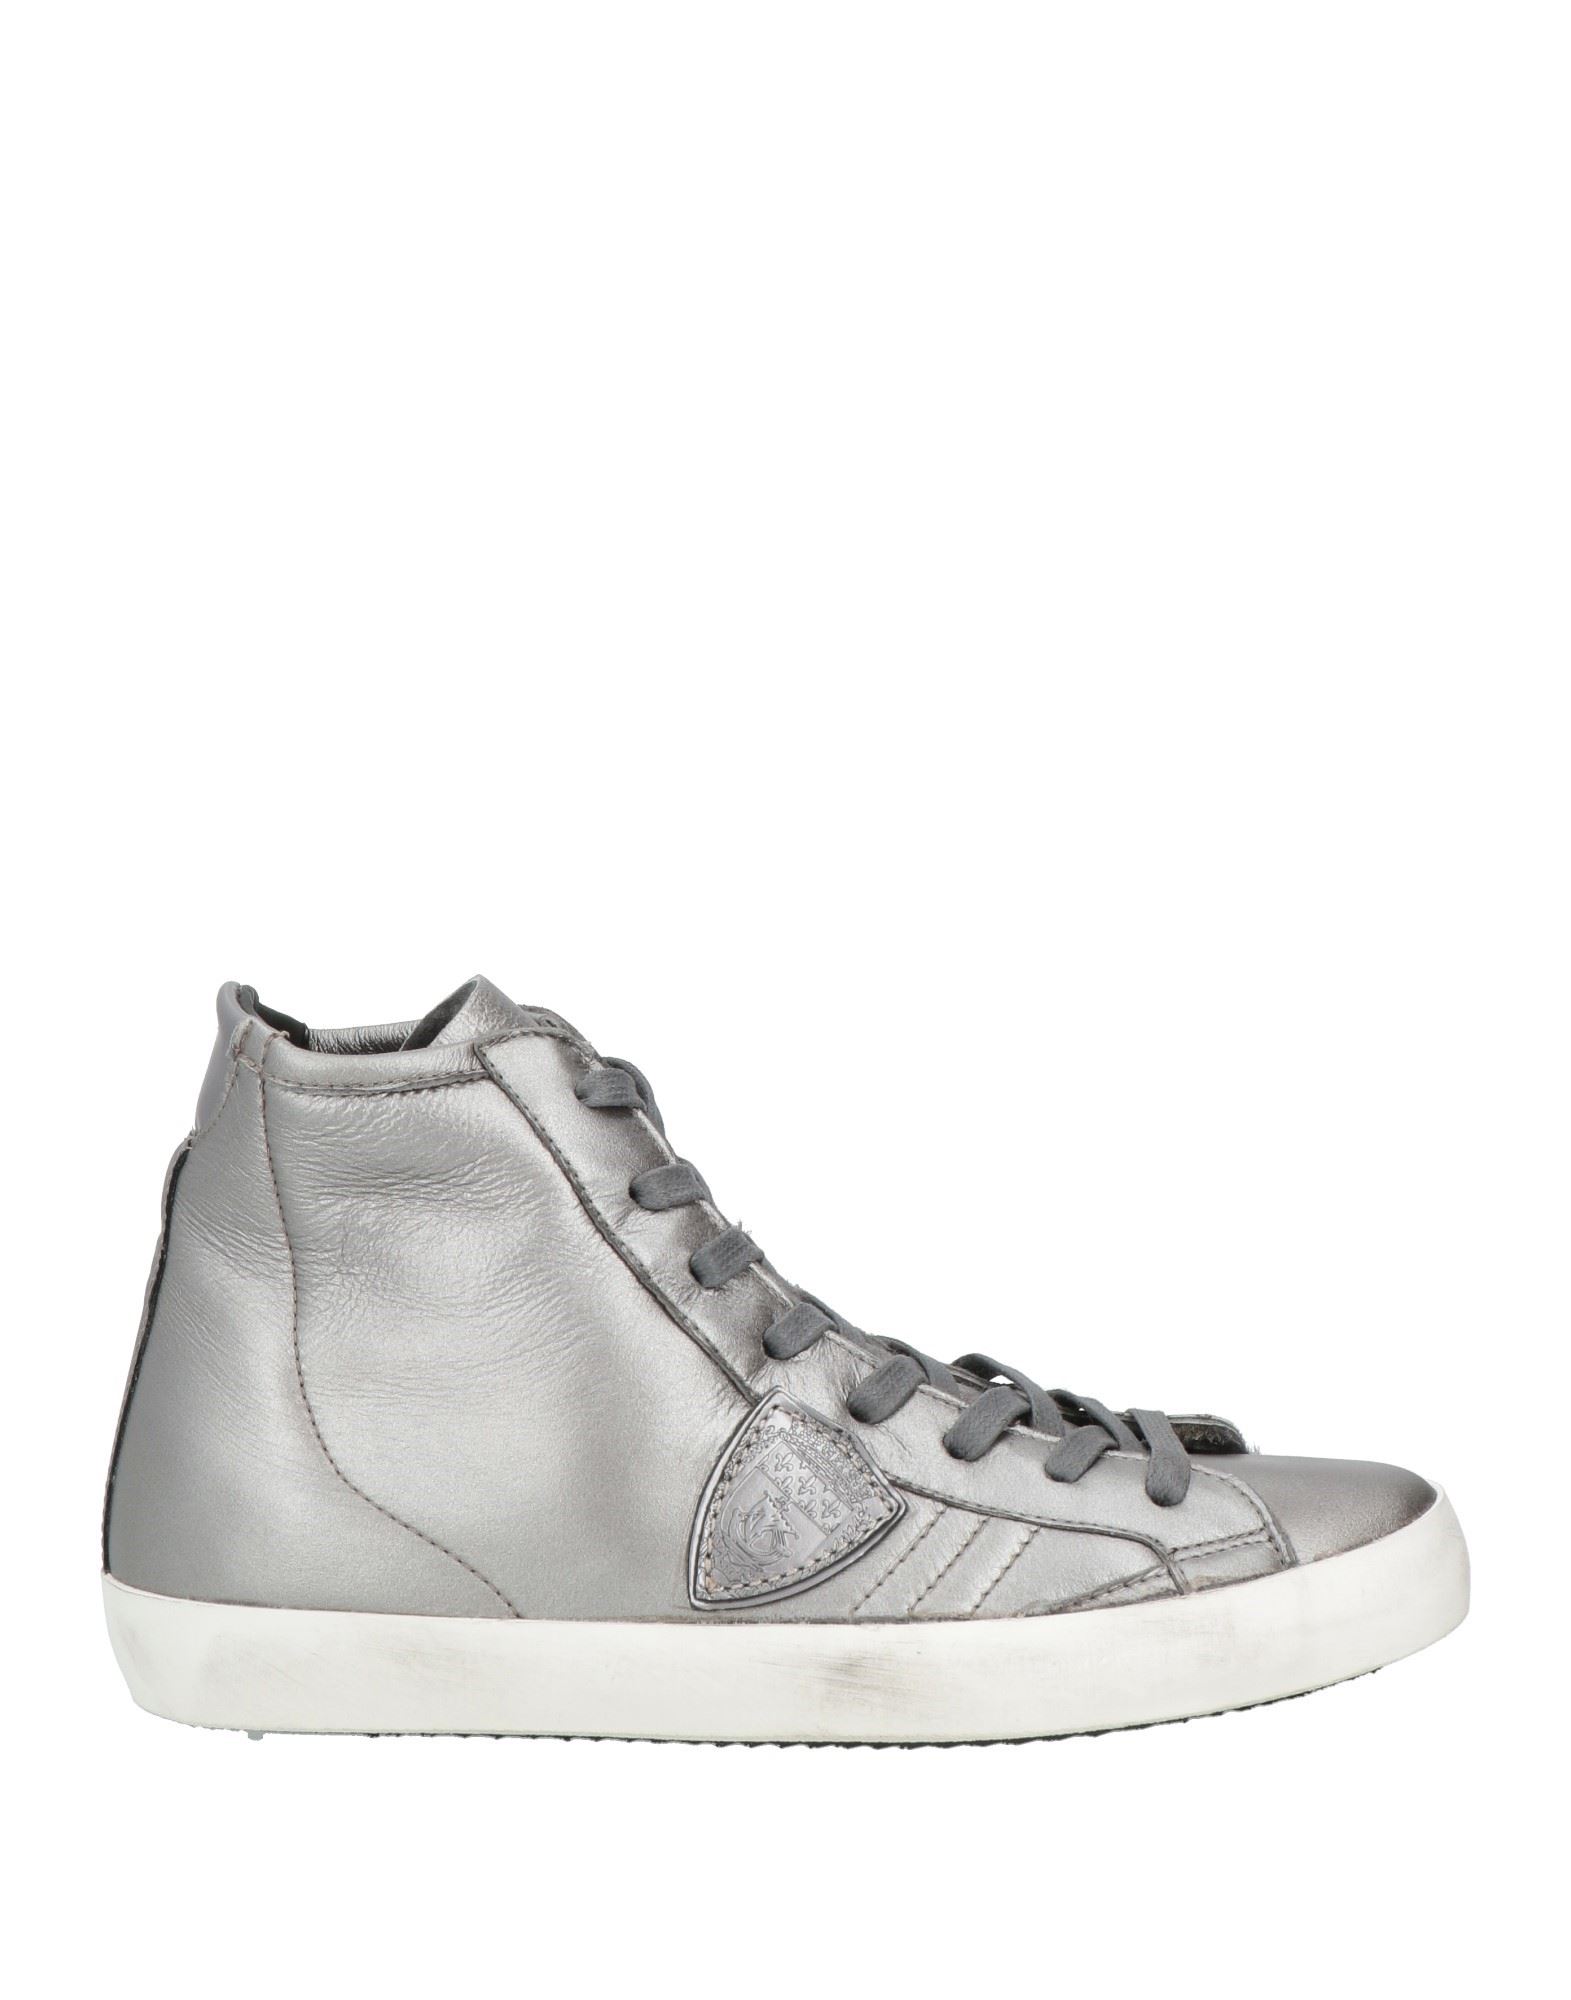 PHILIPPE MODEL PHILIPPE MODEL WOMAN SNEAKERS GREY SIZE 8 SHEARLING,11488092QI 9